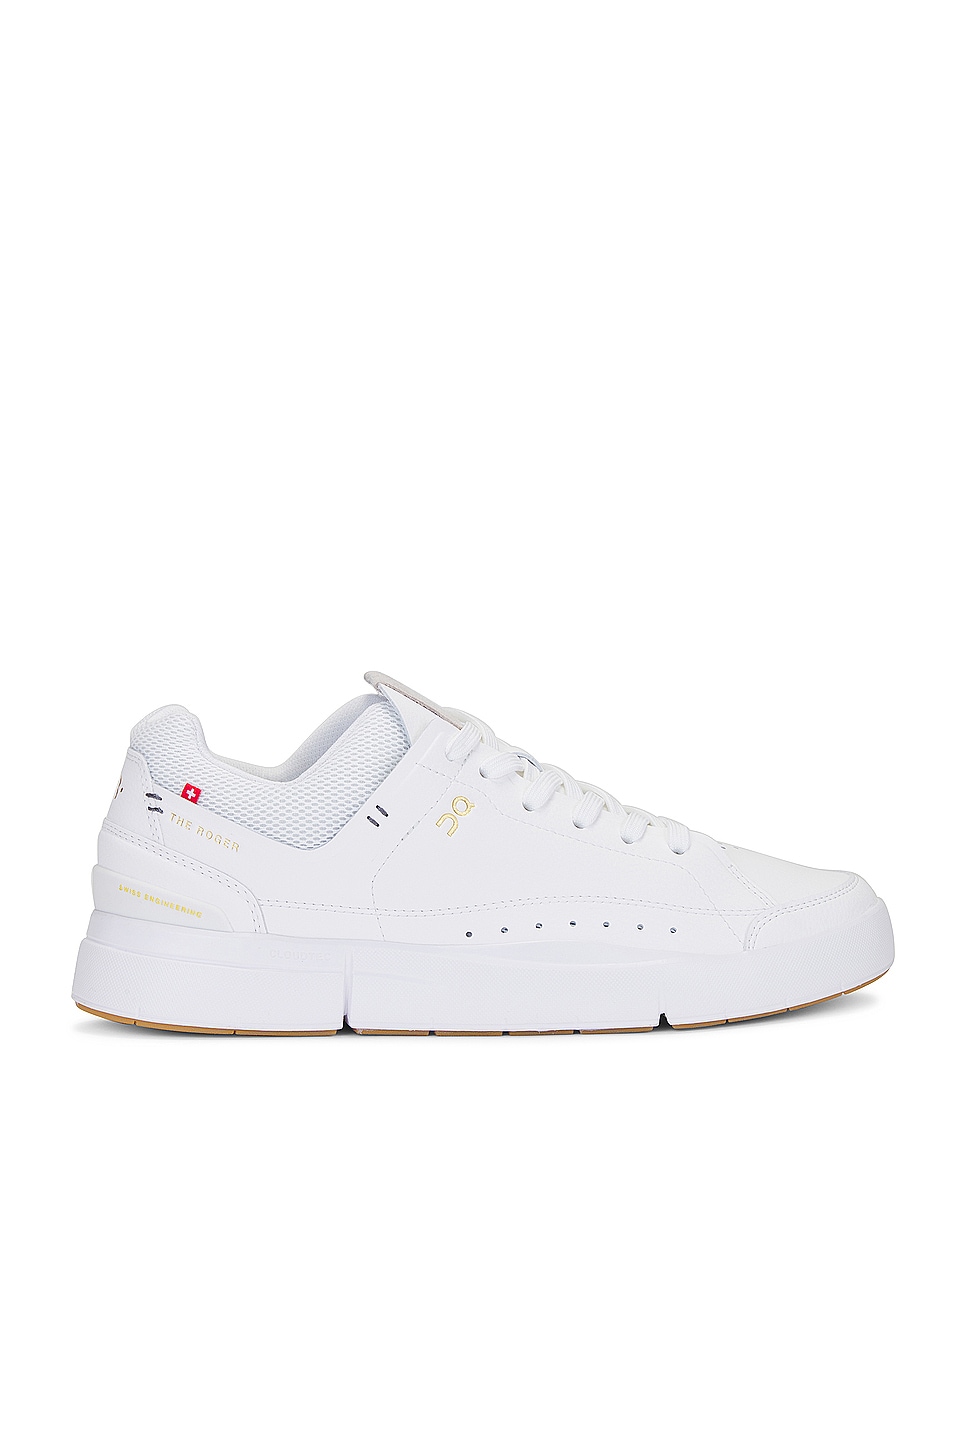 Image 1 of On The Roger Centre Court Sneaker in White & Gum